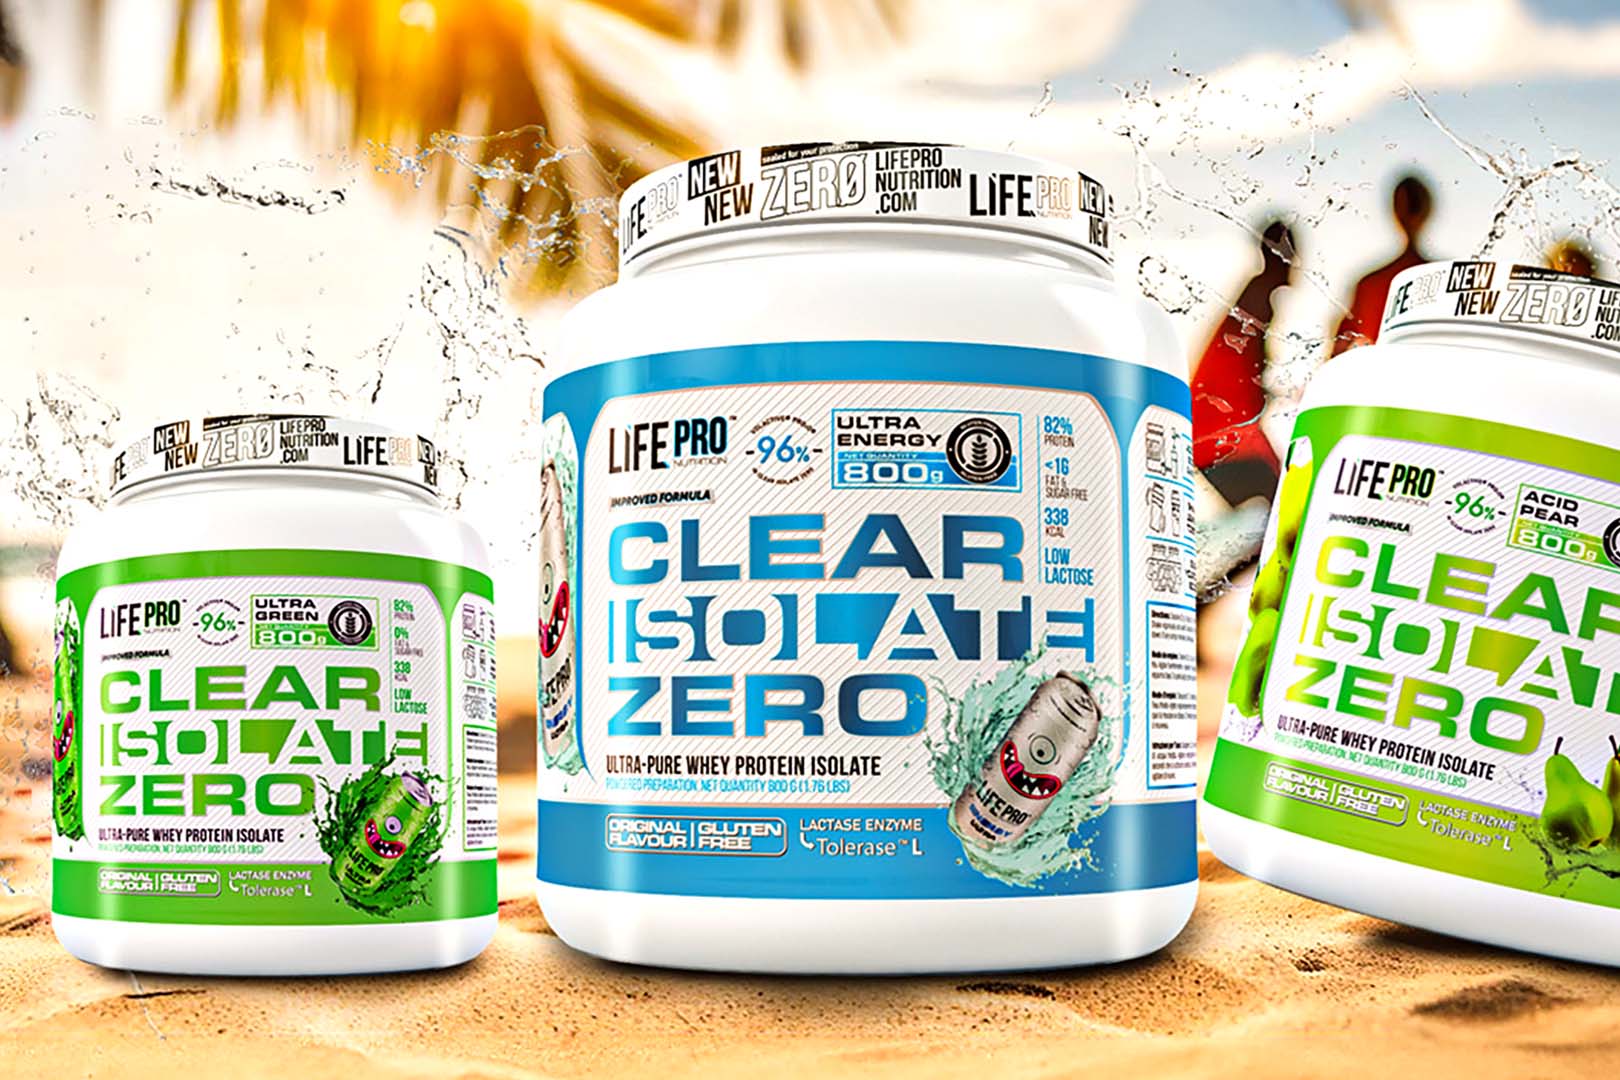 Life Pro Ultra Energy Flavors Of Clear Isolate Zero